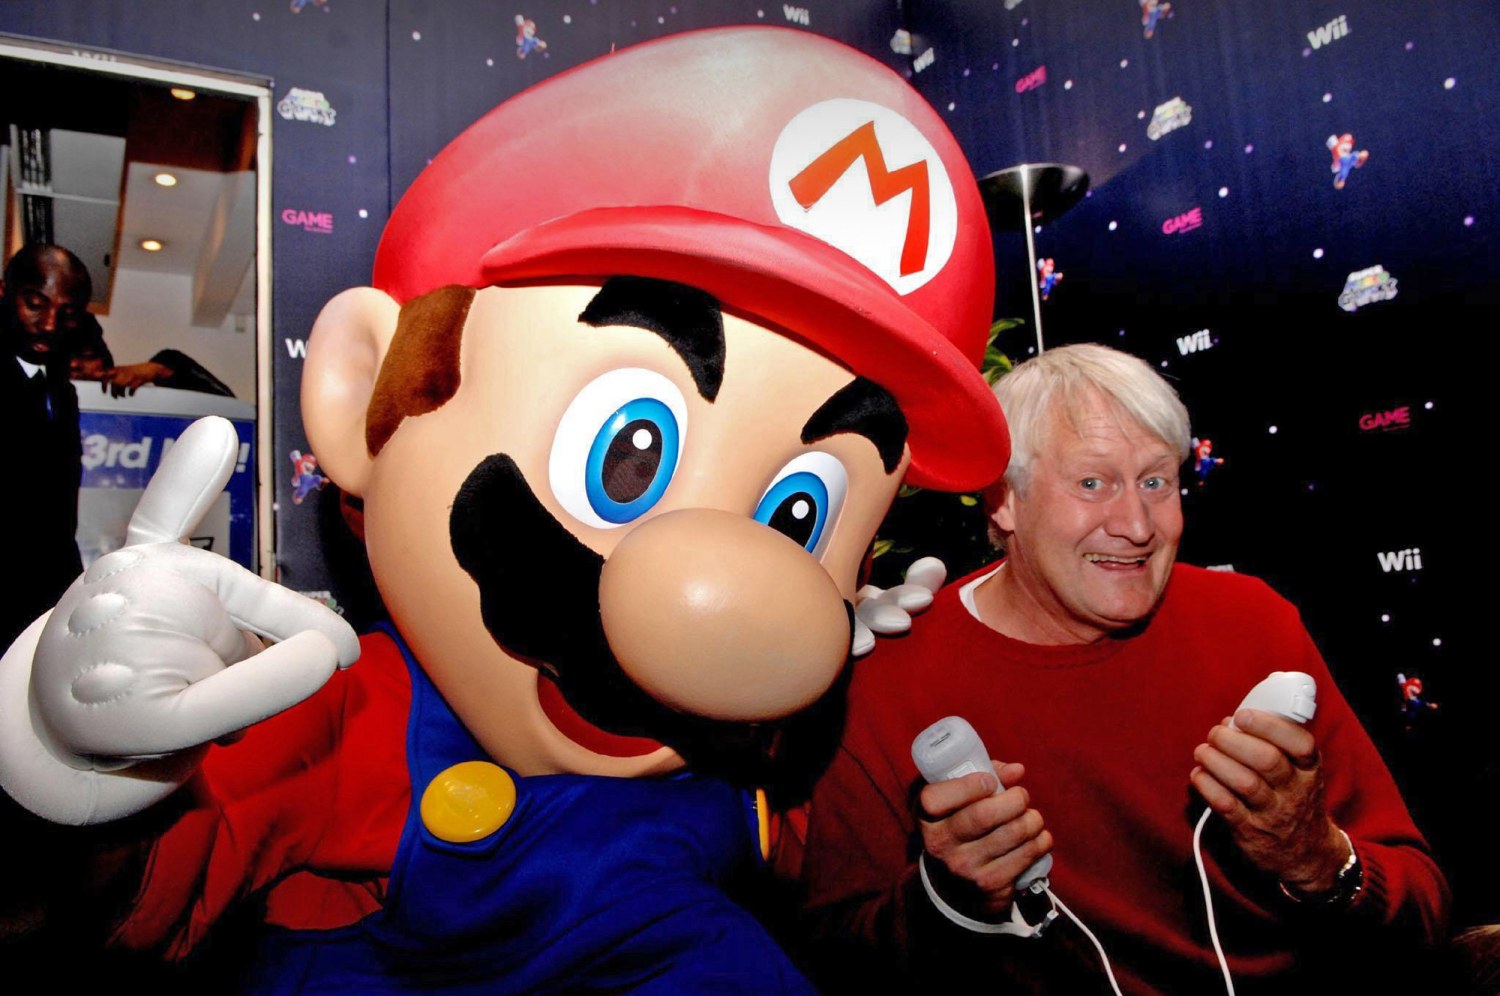 Charles Martinet, iconic voice of Mario, retires from performing as the character in video games